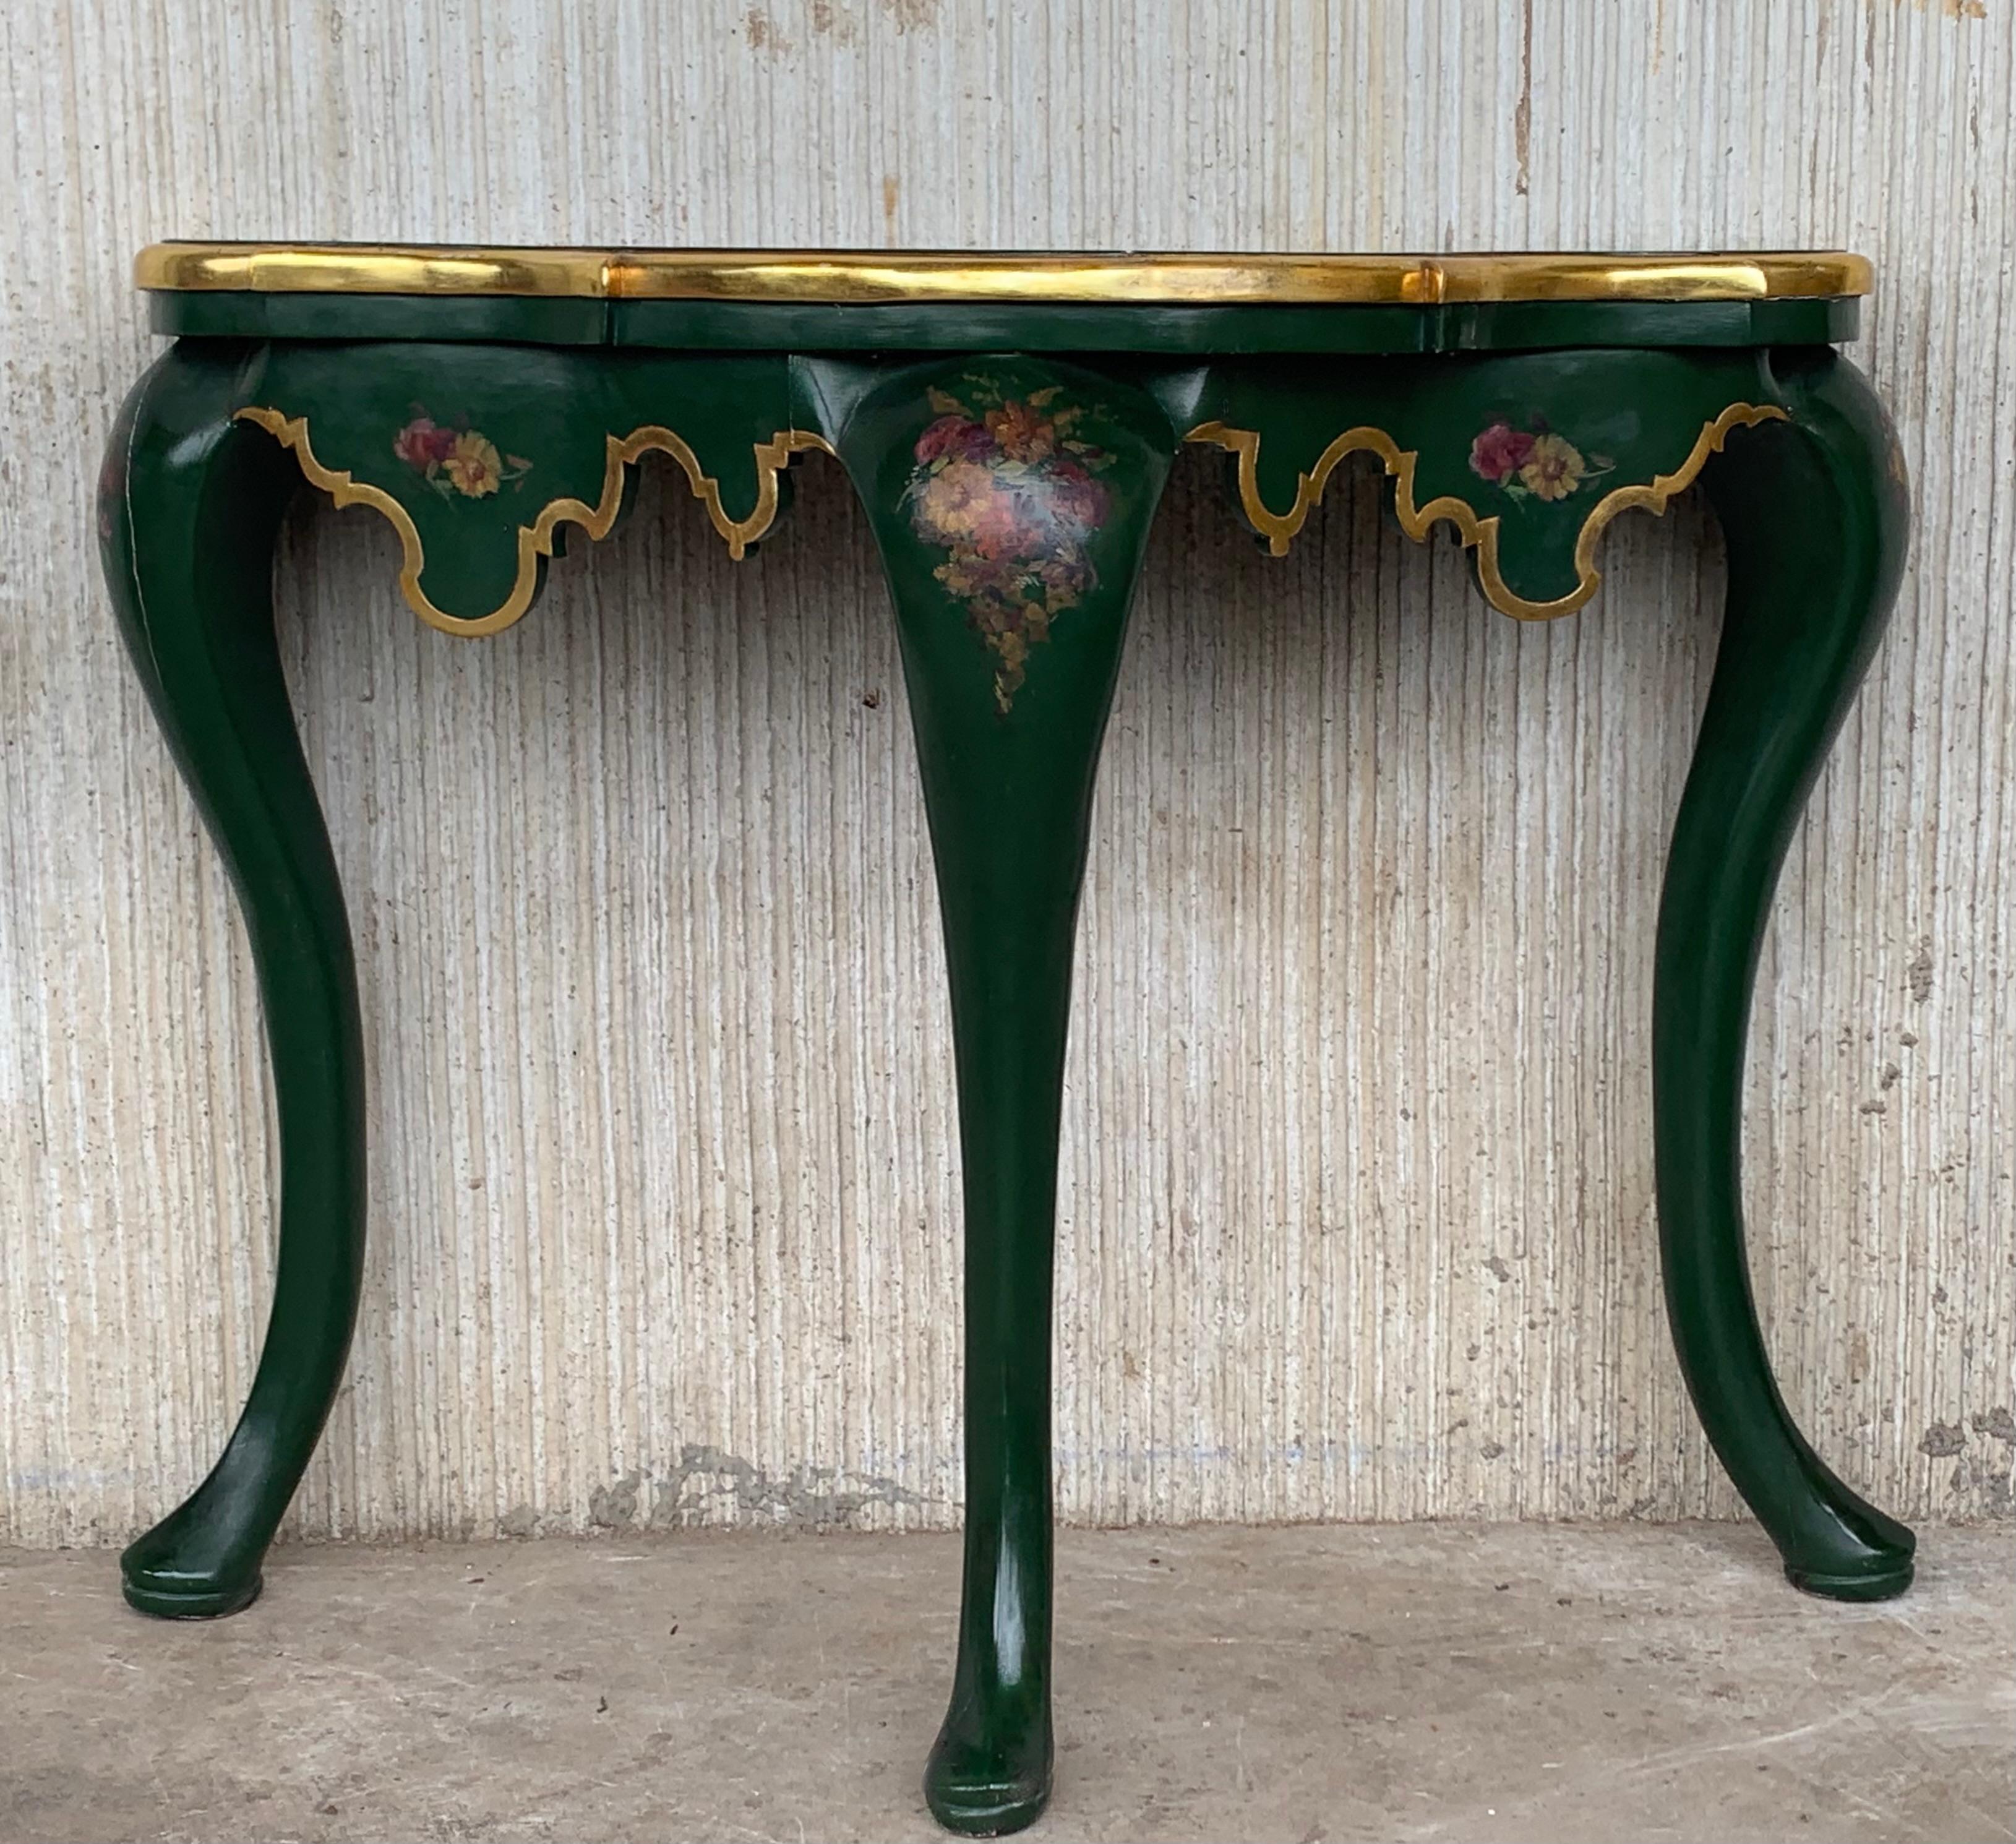 A rare Italian 19th-20th century polychrome painted and floral decorated carved wood console, the serpentine bombé form console decorated with parcel-gilt and colorful floral bouquets over a green painted background, carved with scrolls on cabriole